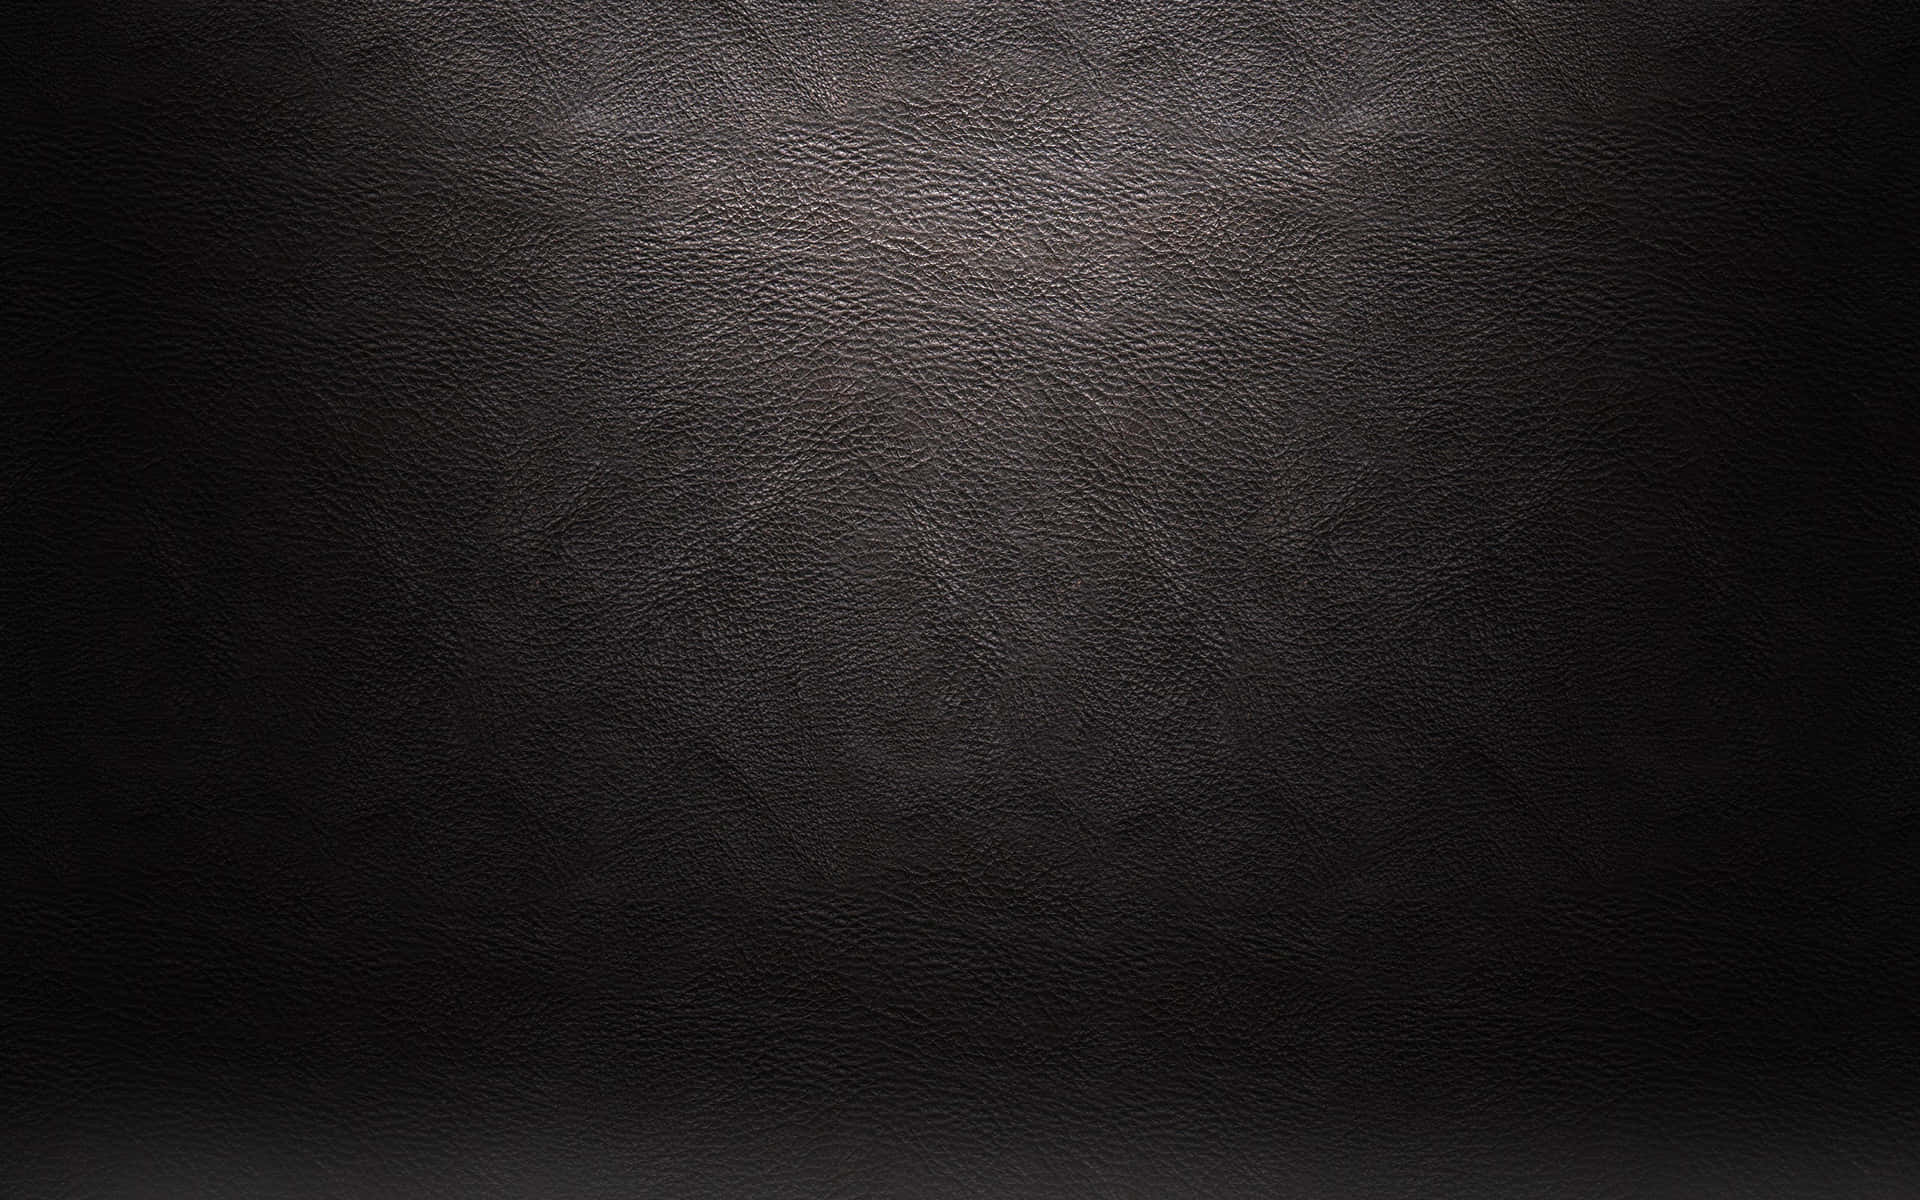 Classic leather background with intricate stitched detail